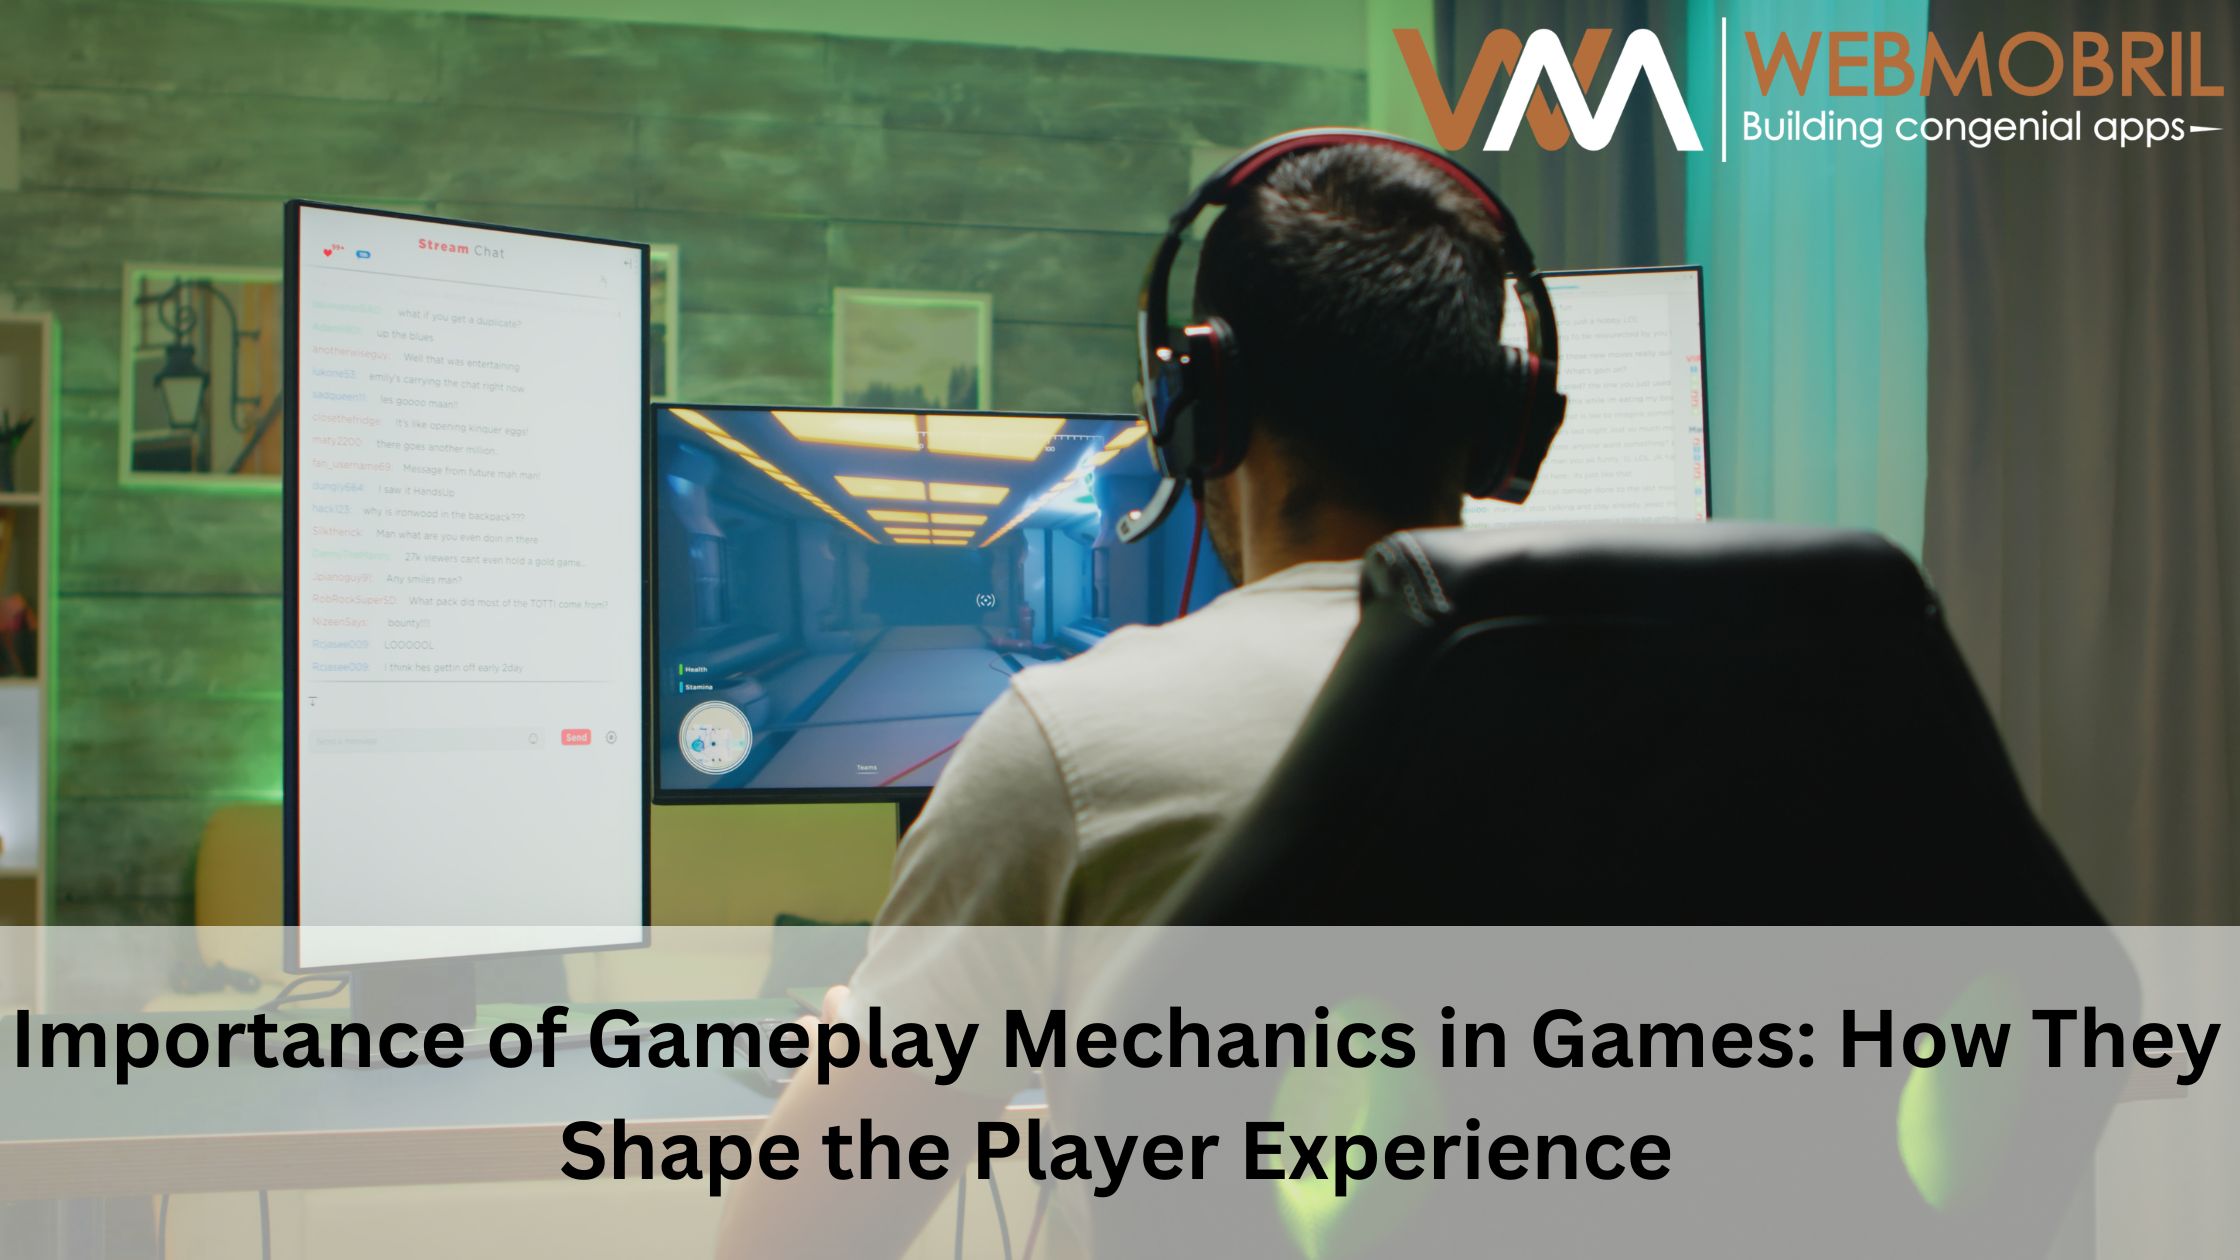 Importance of Gameplay Mechanics in Games: How They Shape the Player Experience